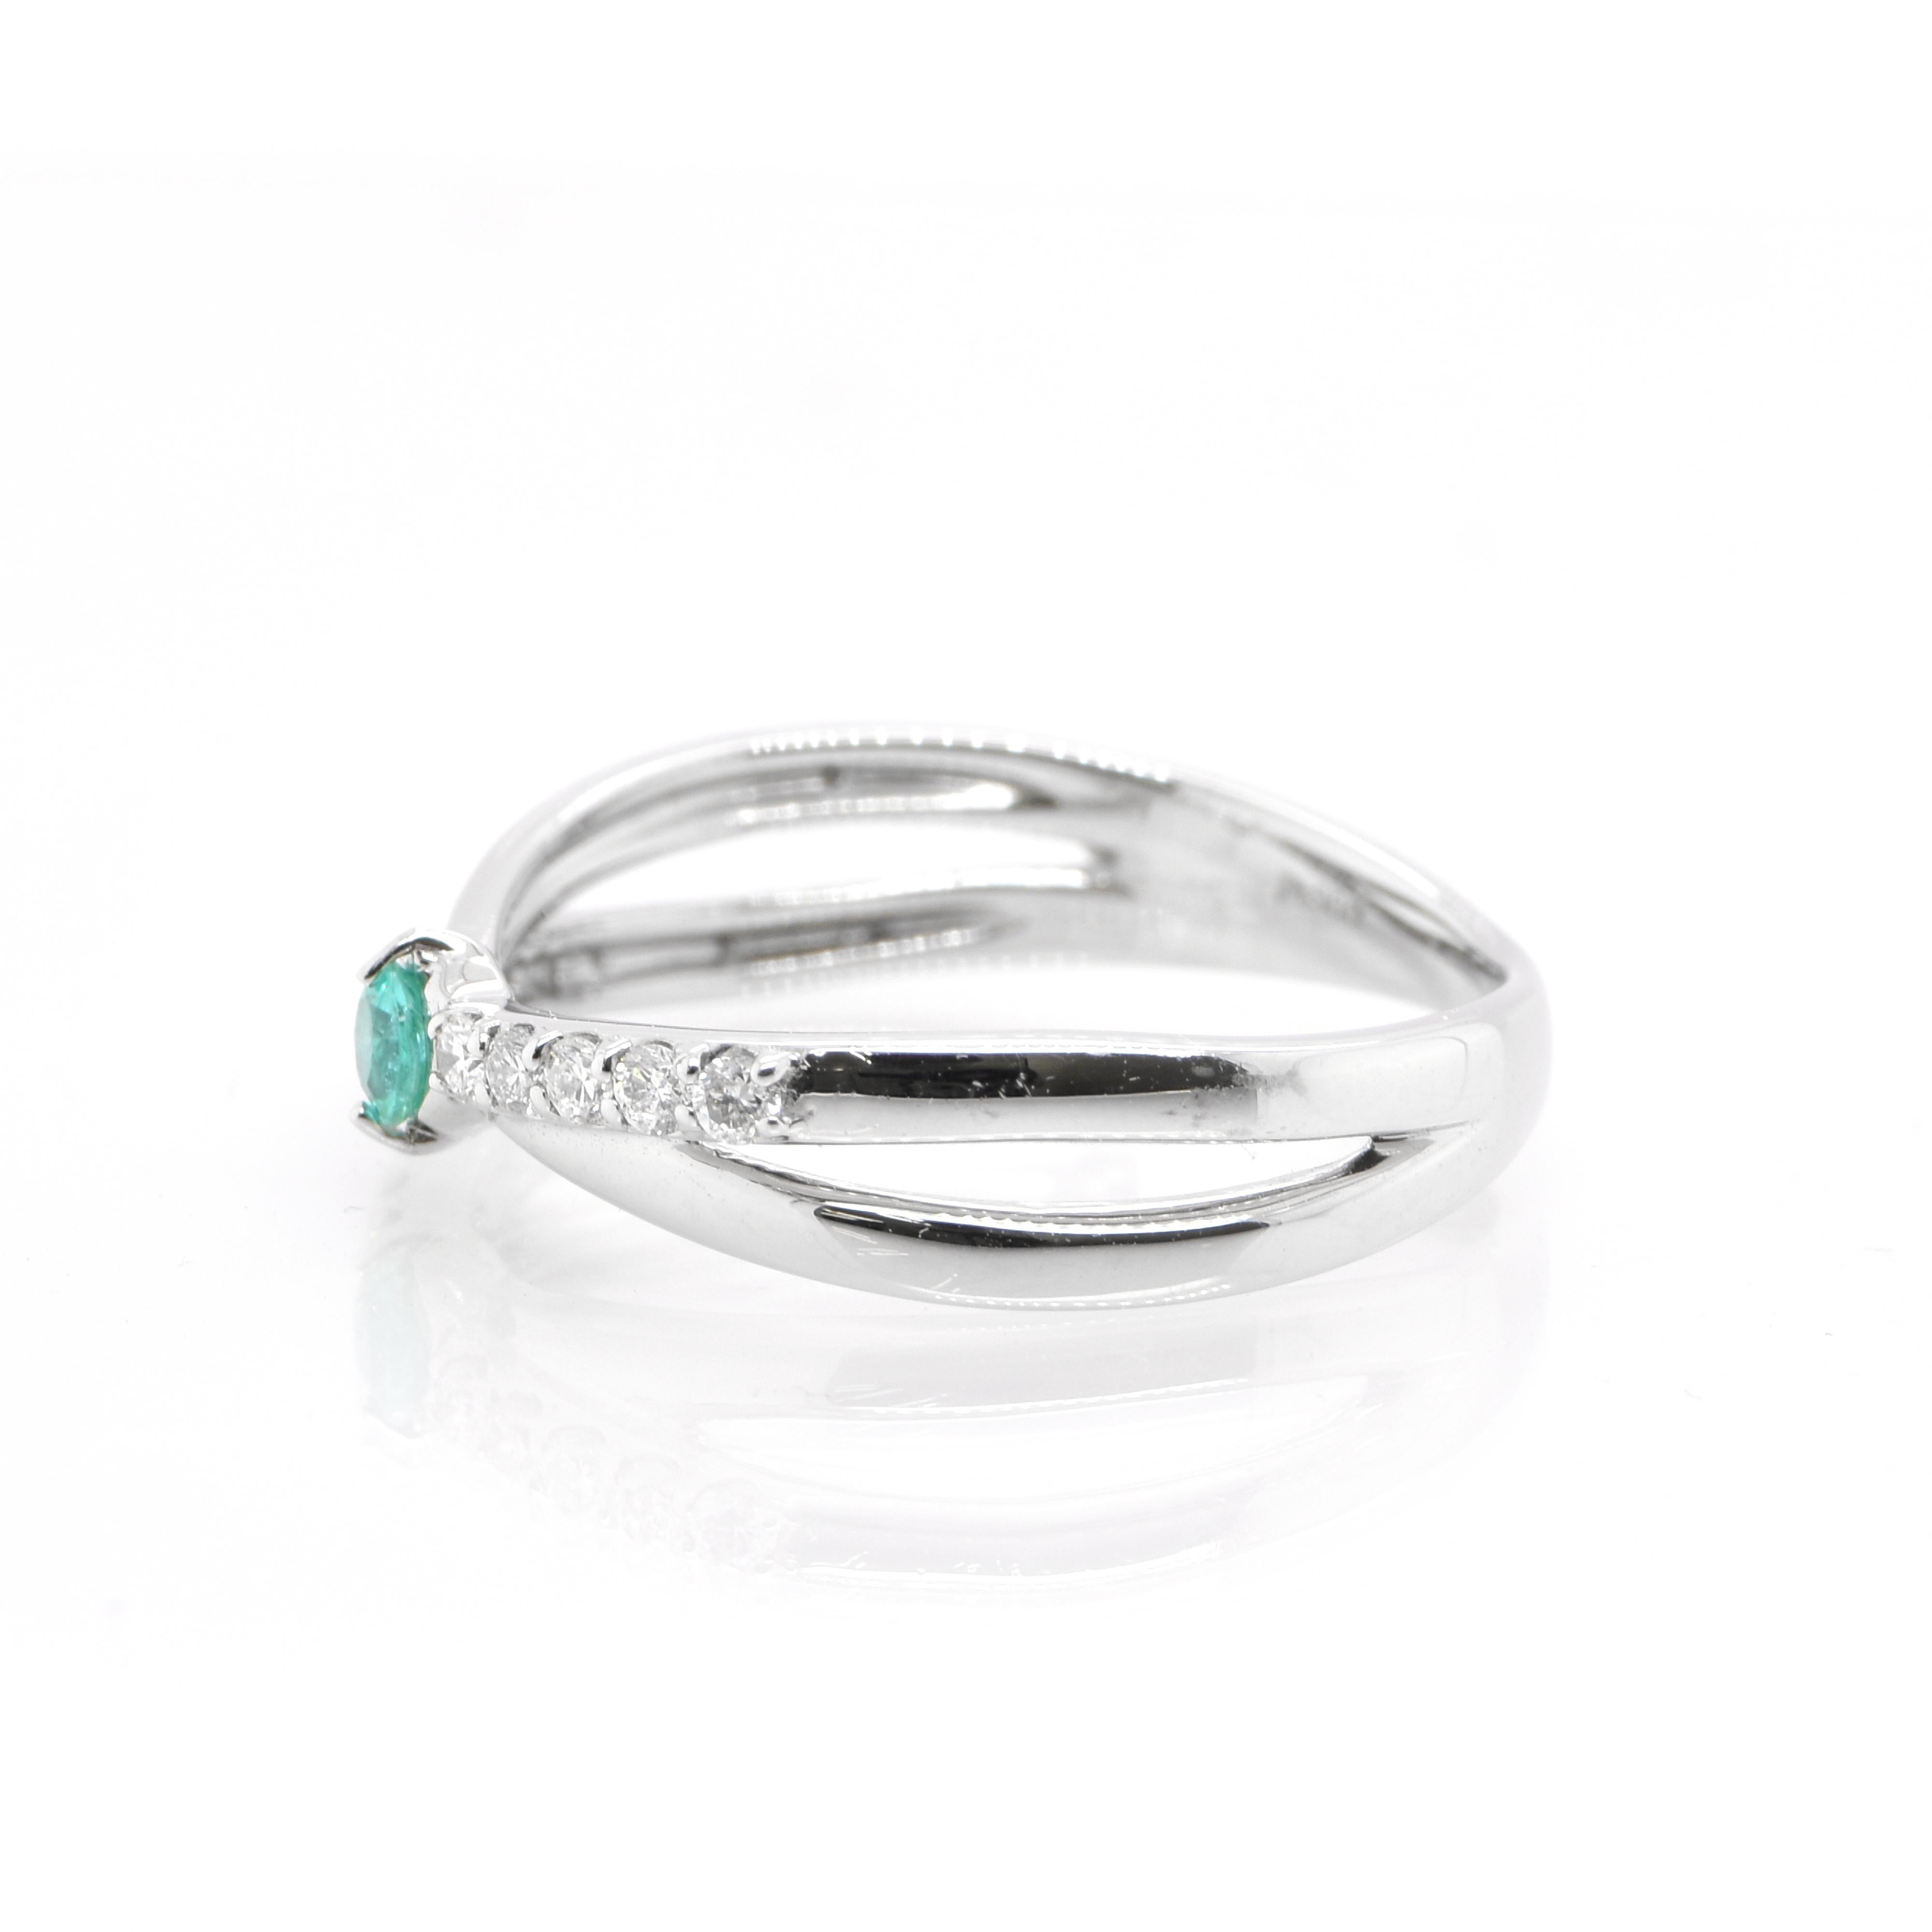 A beautiful Engagement Ring featuring a 0.11 Carat Natural Paraiba Tourmaline and 0.15 Carats of Diamond Accents set in Platinum. Paraiba Tourmalines were only discovered 30 years ago in the Brazilian state of the same name- Paraiba. Since then they